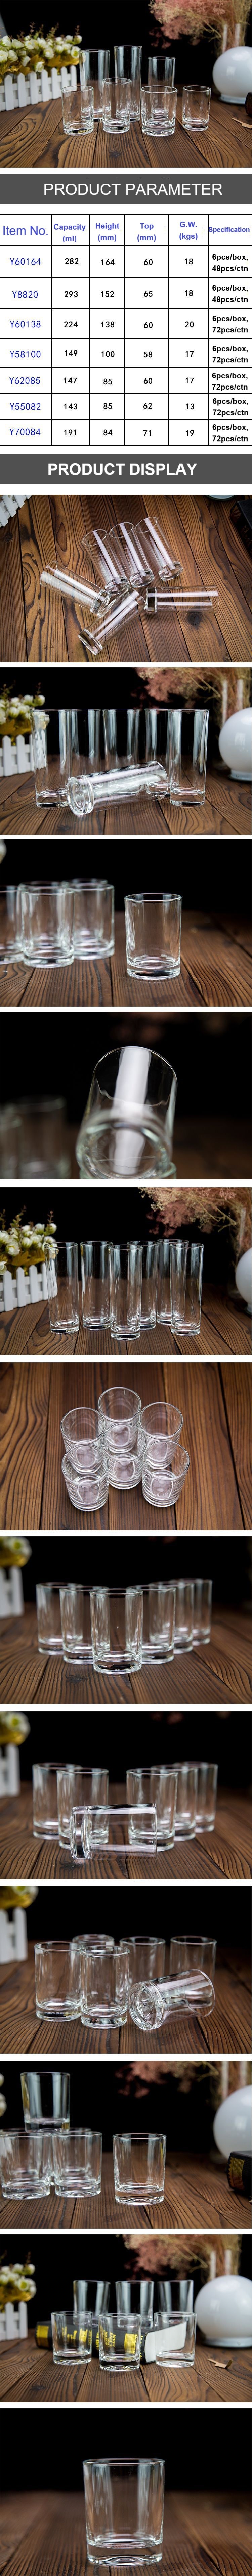 Wholesale & Manufacture Series Whisky Cup Tumbler